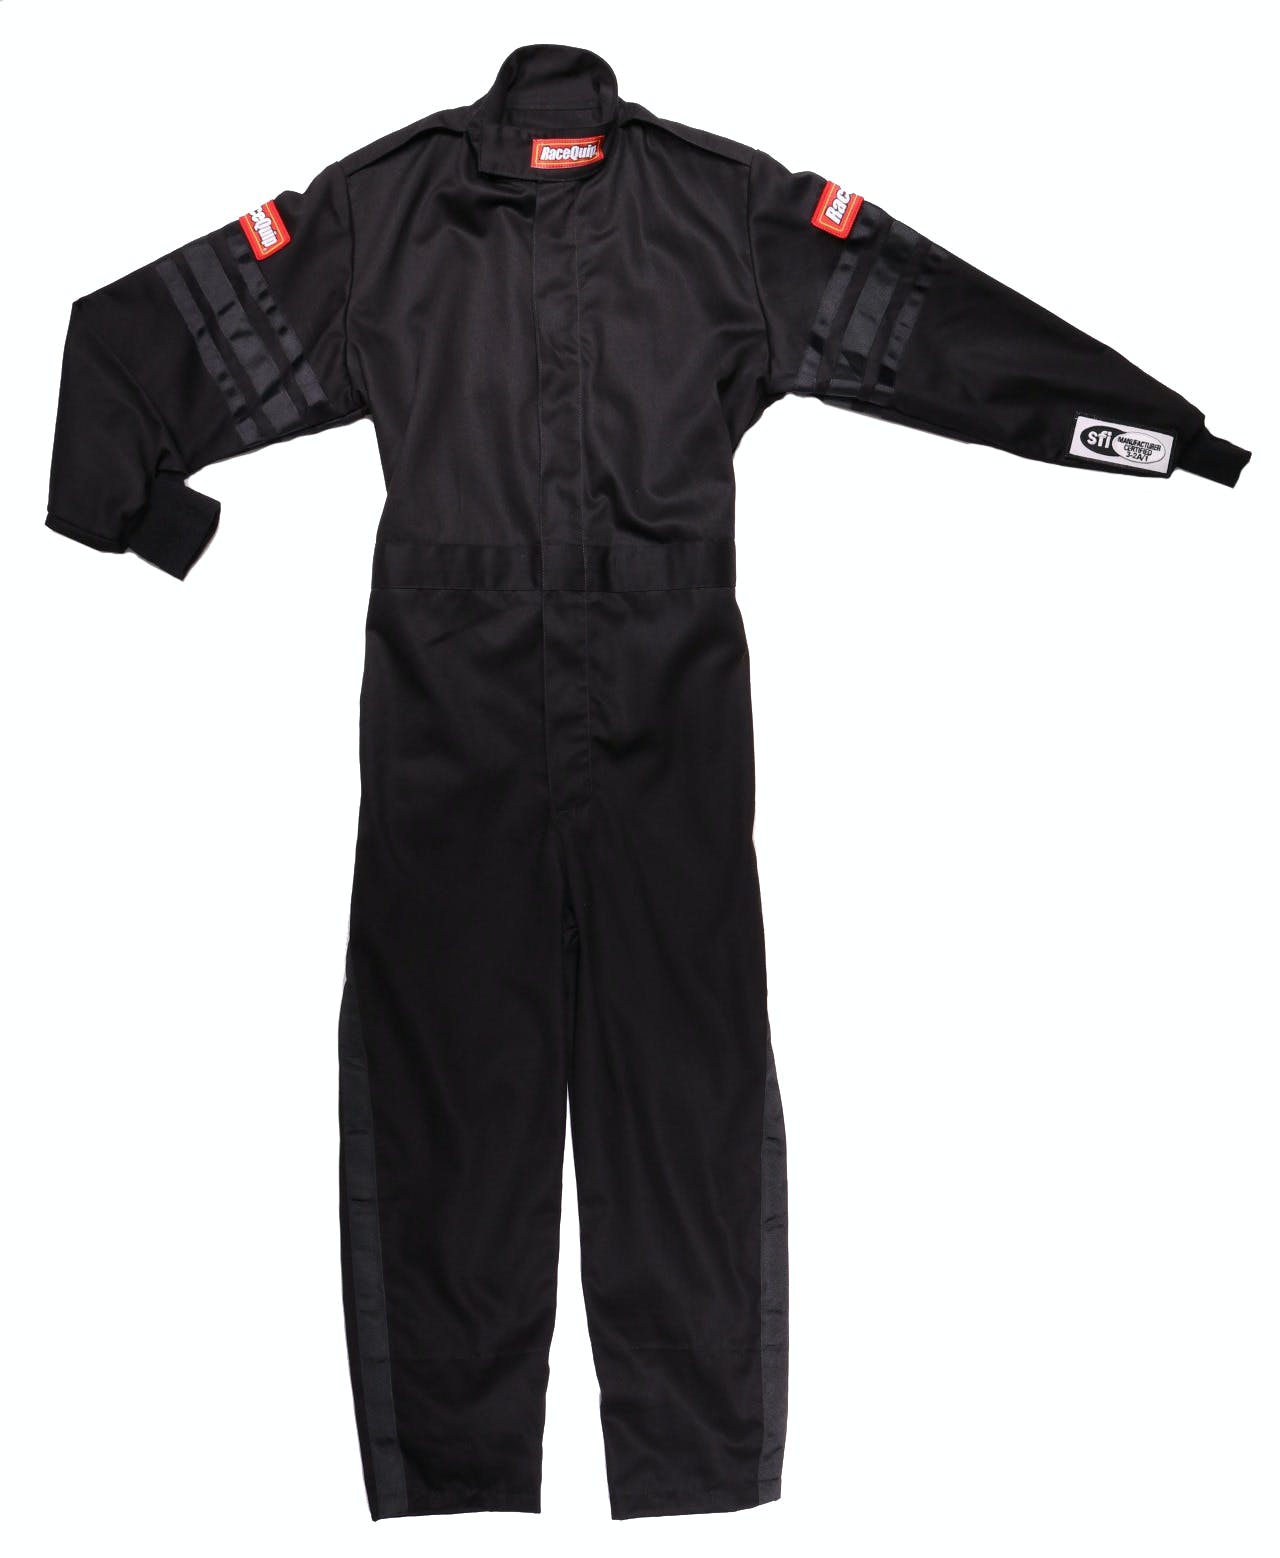 RaceQuip 1959992 SFI-1 Pyrovatex One-Piece Single-Layer Youth Racing Fire Suit (Black/Blue-S)